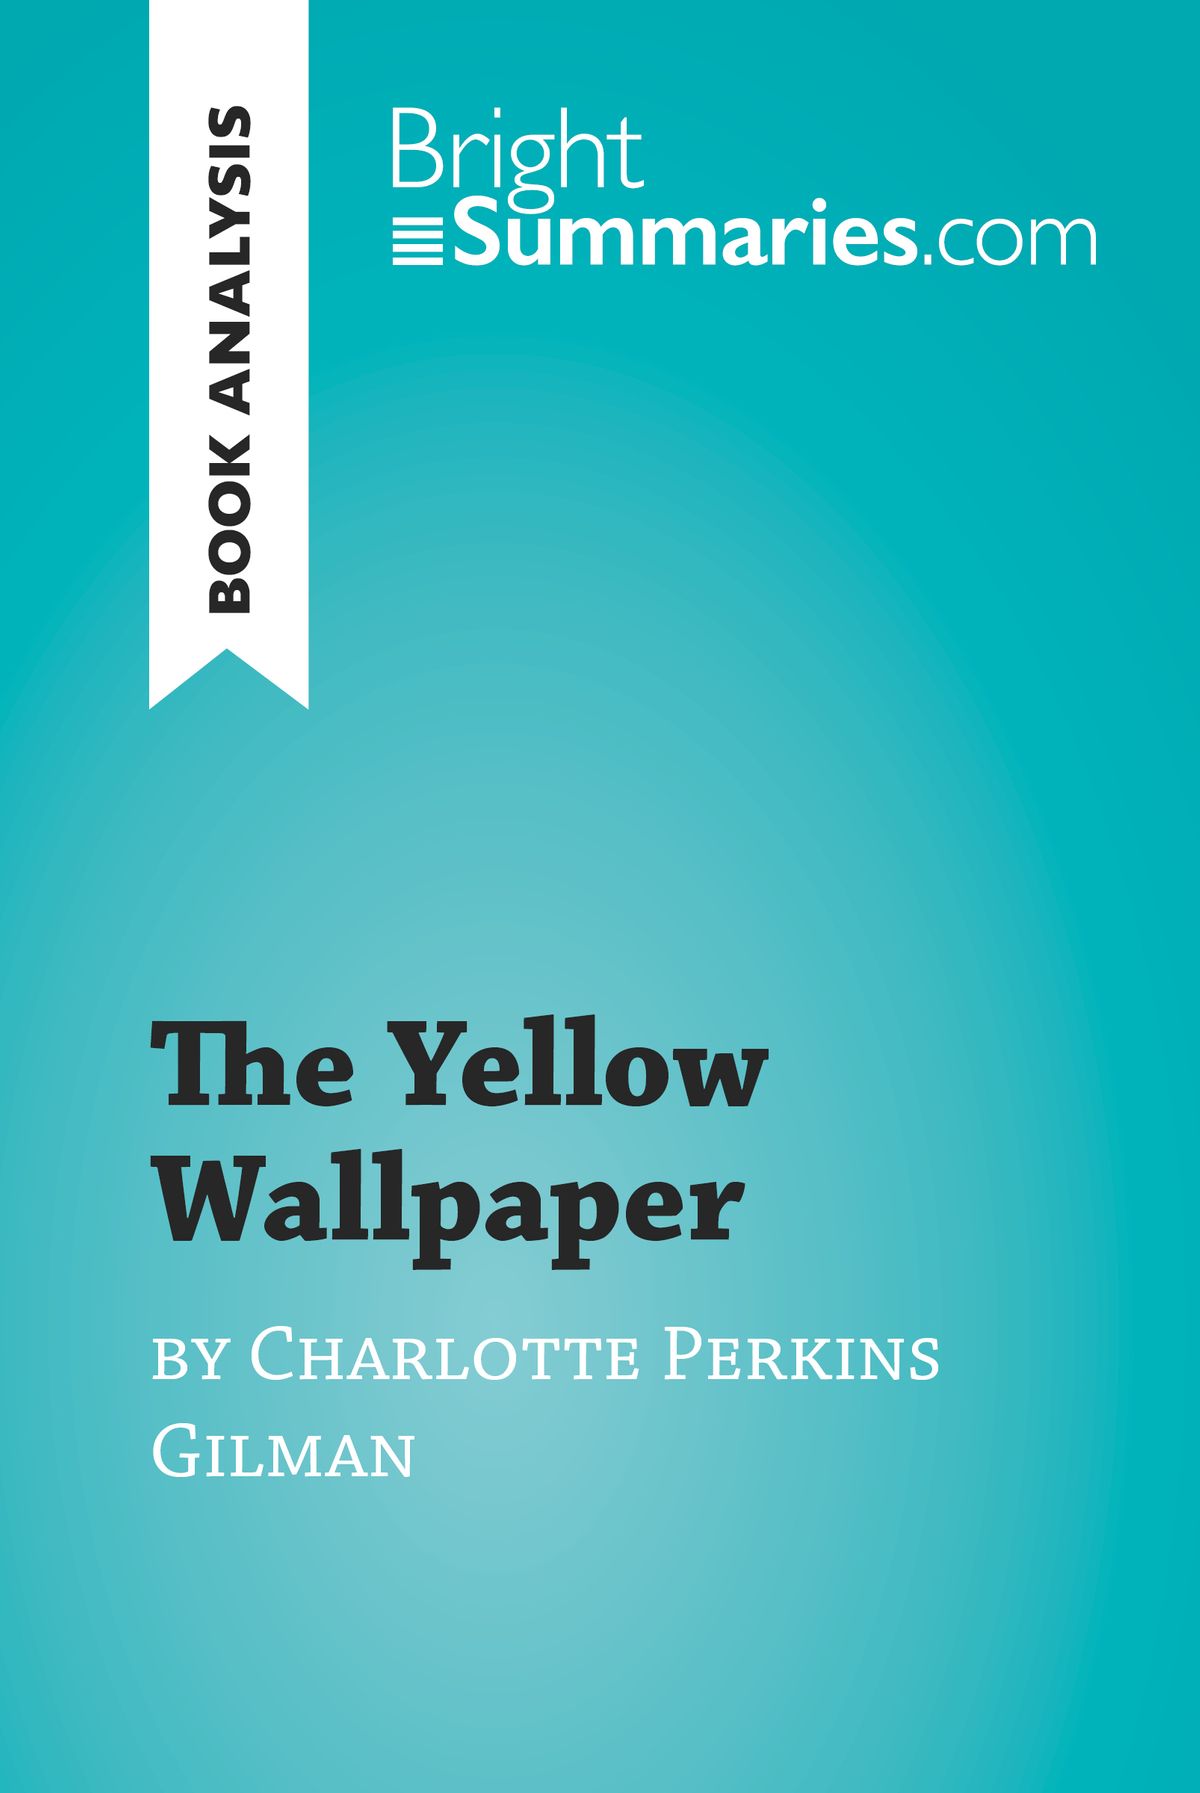 The Yellow Wallpaper By Charlotte Perkins Gilman Book Analysis